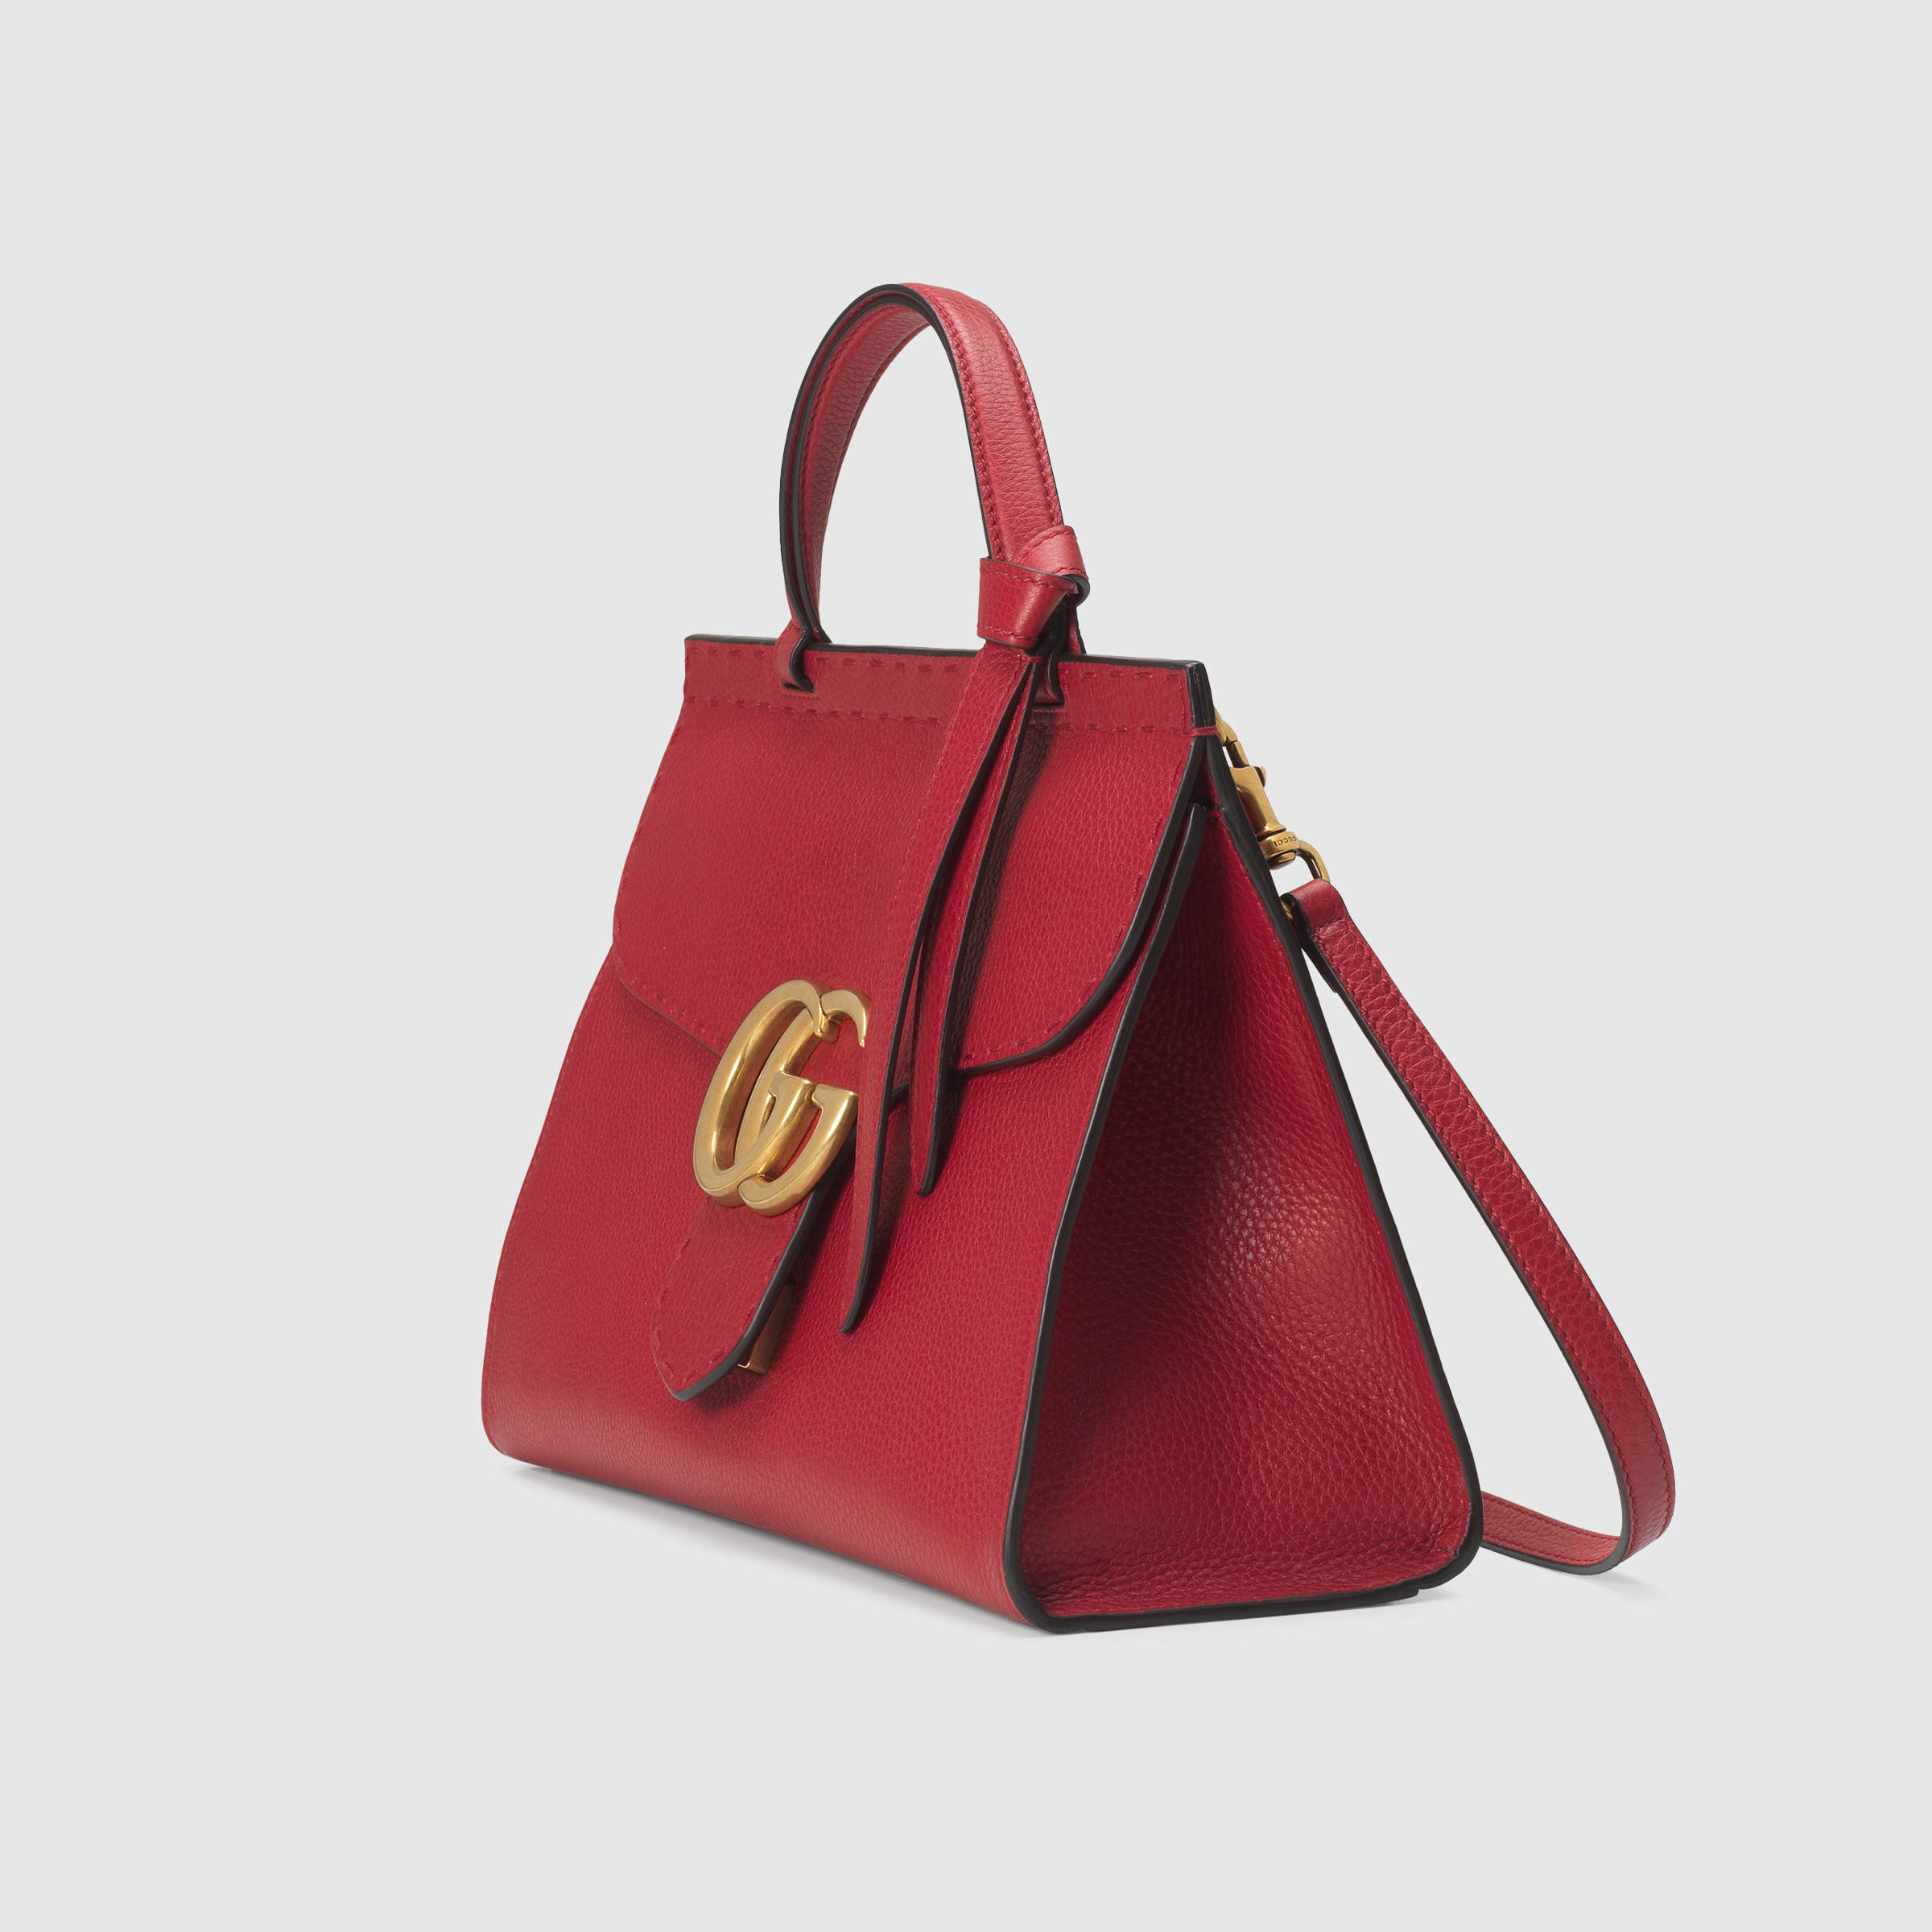 Gucci GG Marmont Leather Top-Handle Bag in Red (red leather) | Lyst